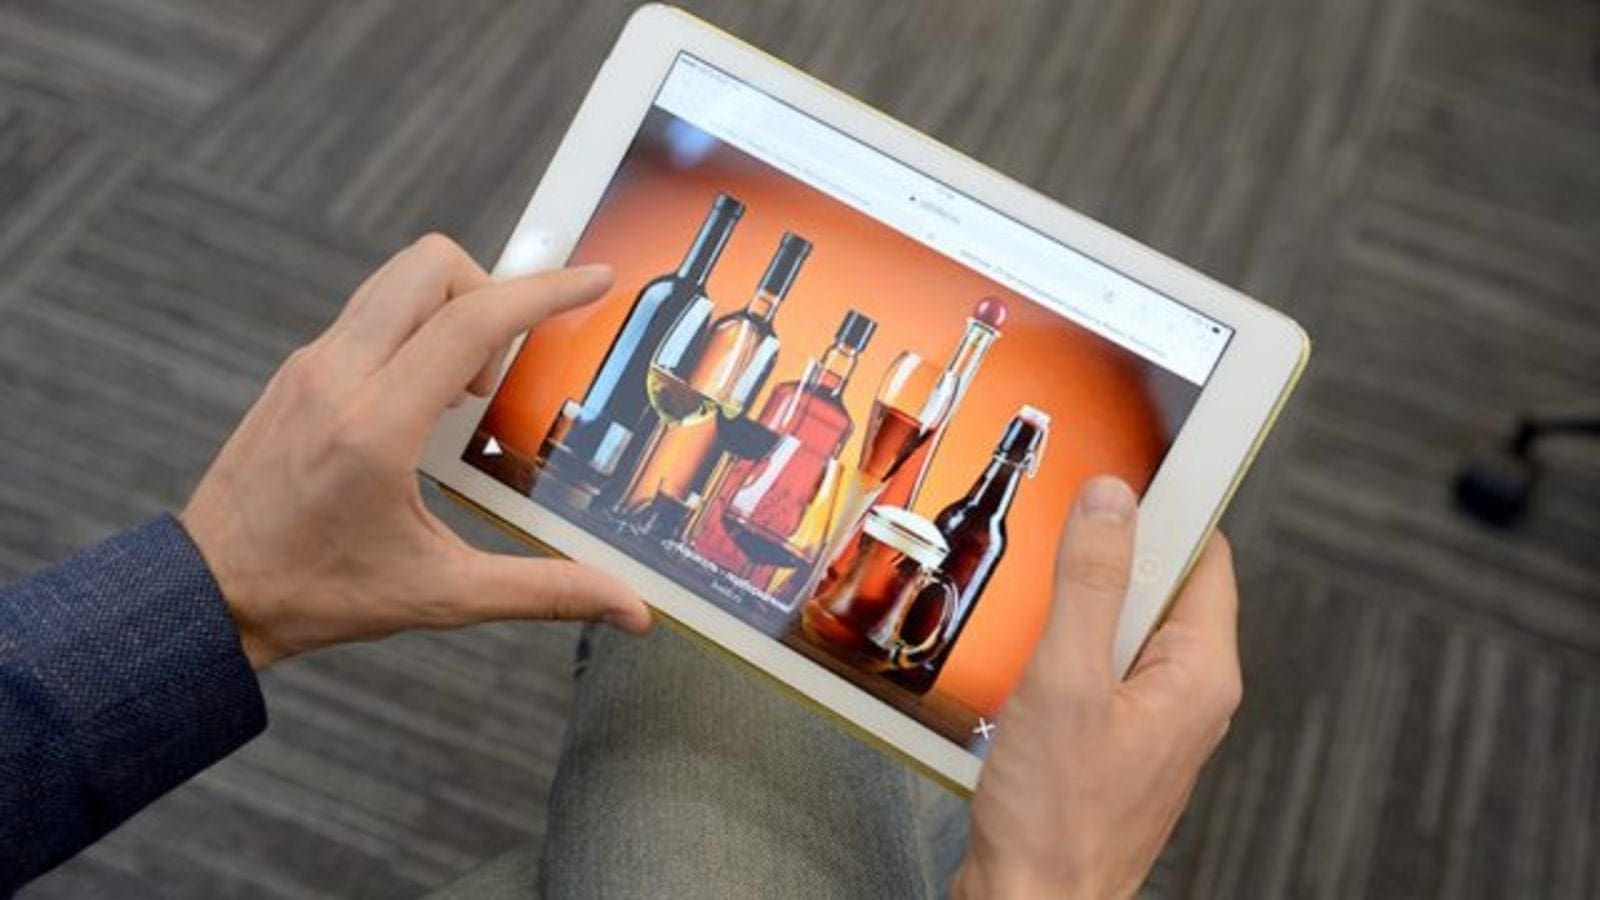 Moët Hennessy, Campari partner to build a European ecommerce platform for wines and spirits